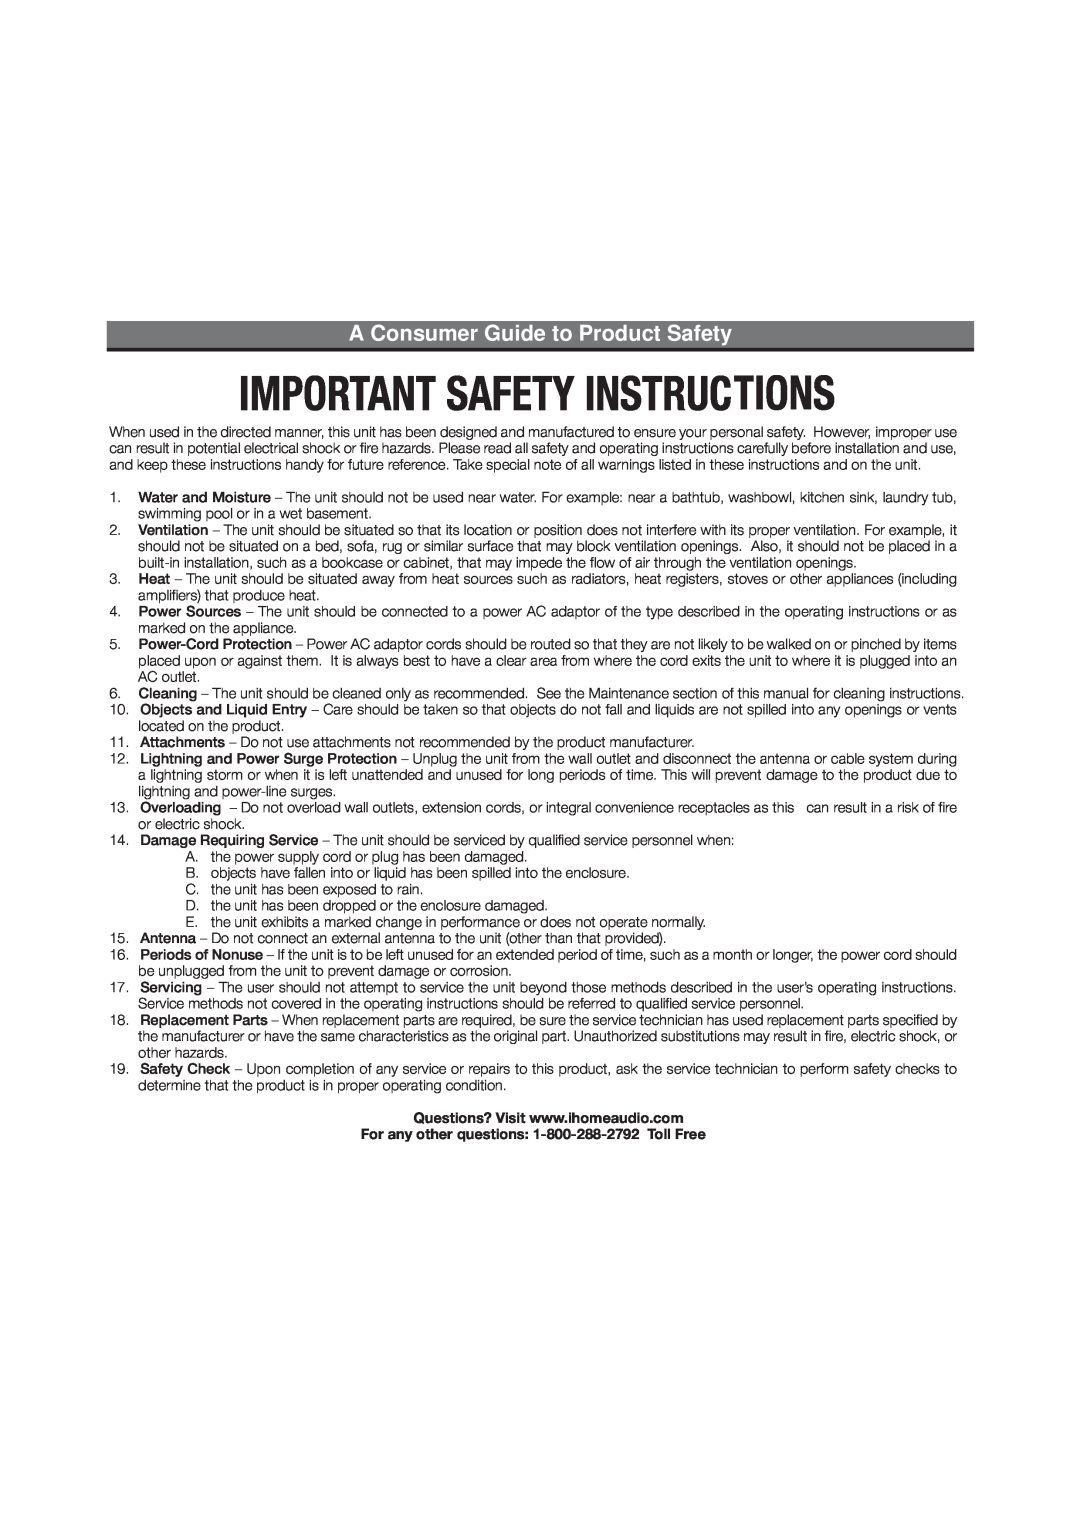 iHome iH80 manual A Consumer Guide to Product Safety 